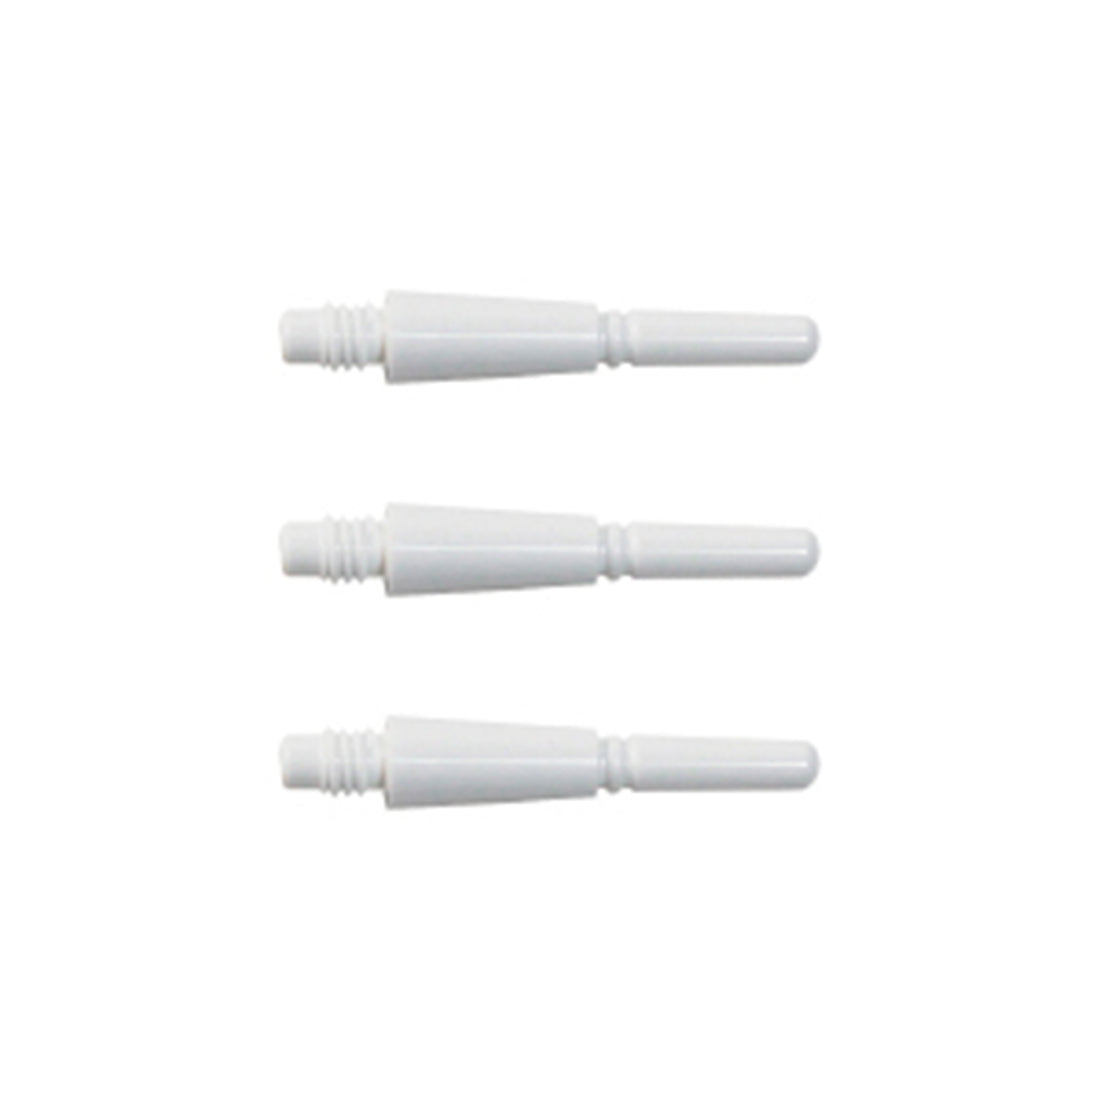 Cosmo Fit Carbon Normal Locked Dart Shafts - Pearl White - Break